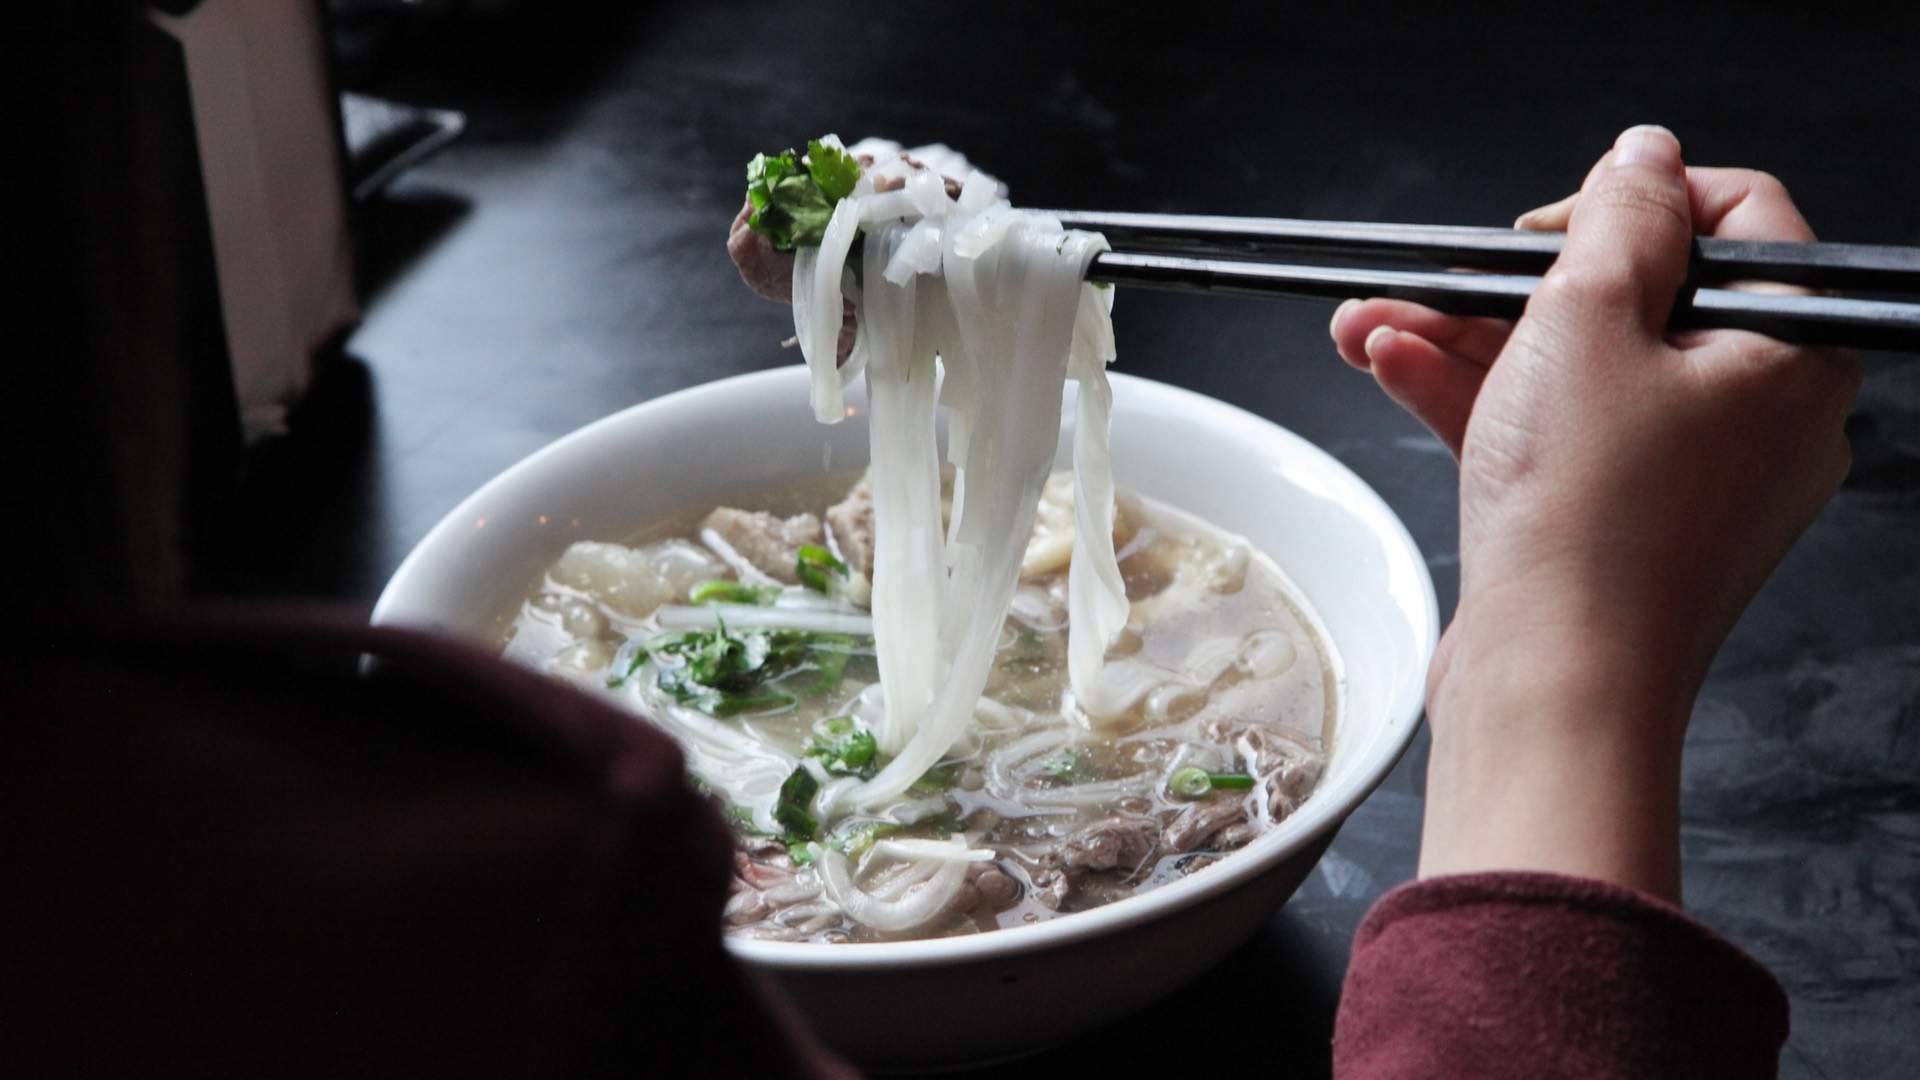 This Melbourne Pho Joint Is Serving Up Steamy Bowls of Pho 24 Hours a Day